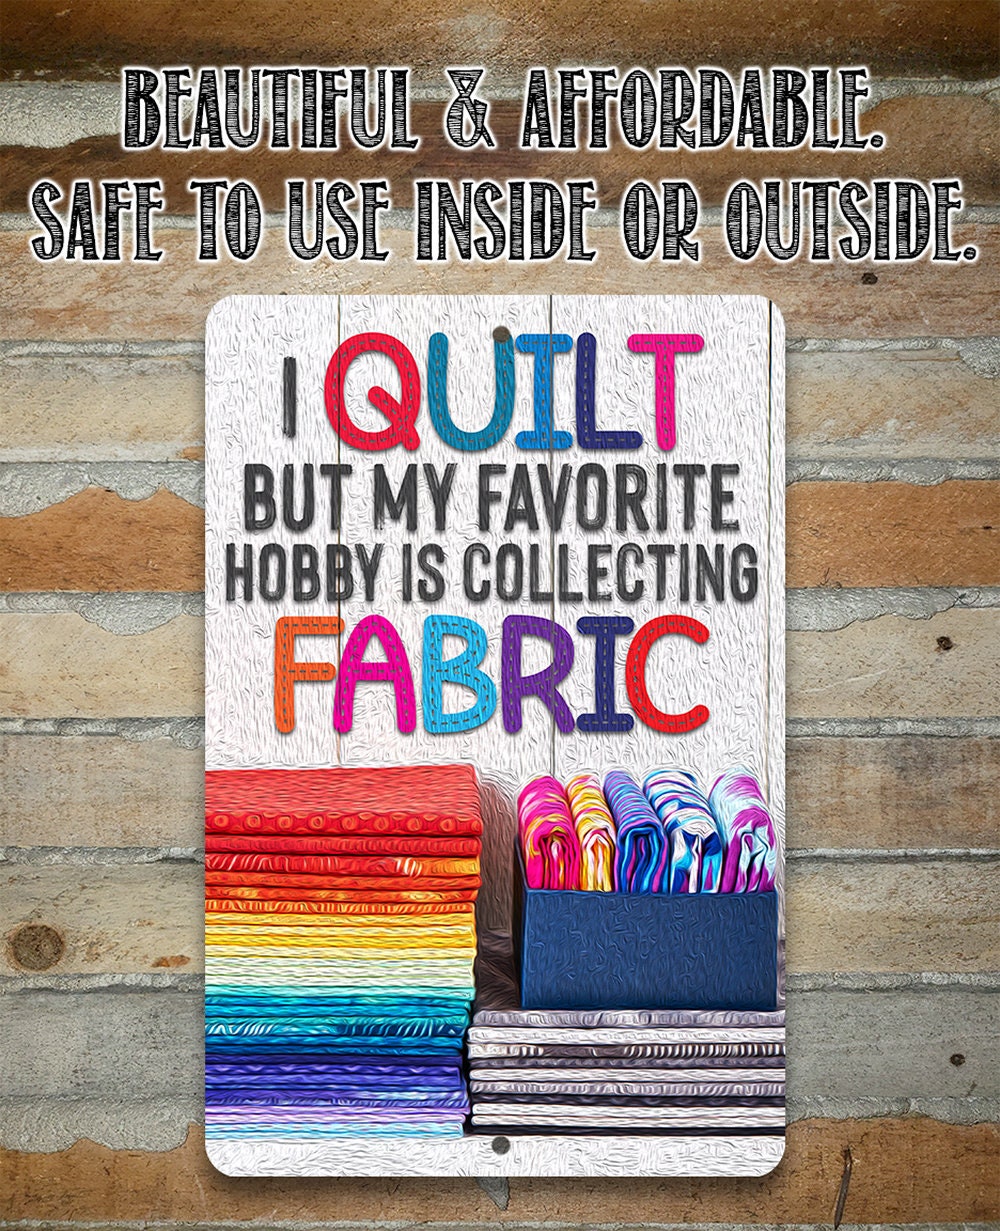 I Quilt But My Favorite Hobby is Collecting Fabric - Metal Sign Metal Sign Lone Star Art 